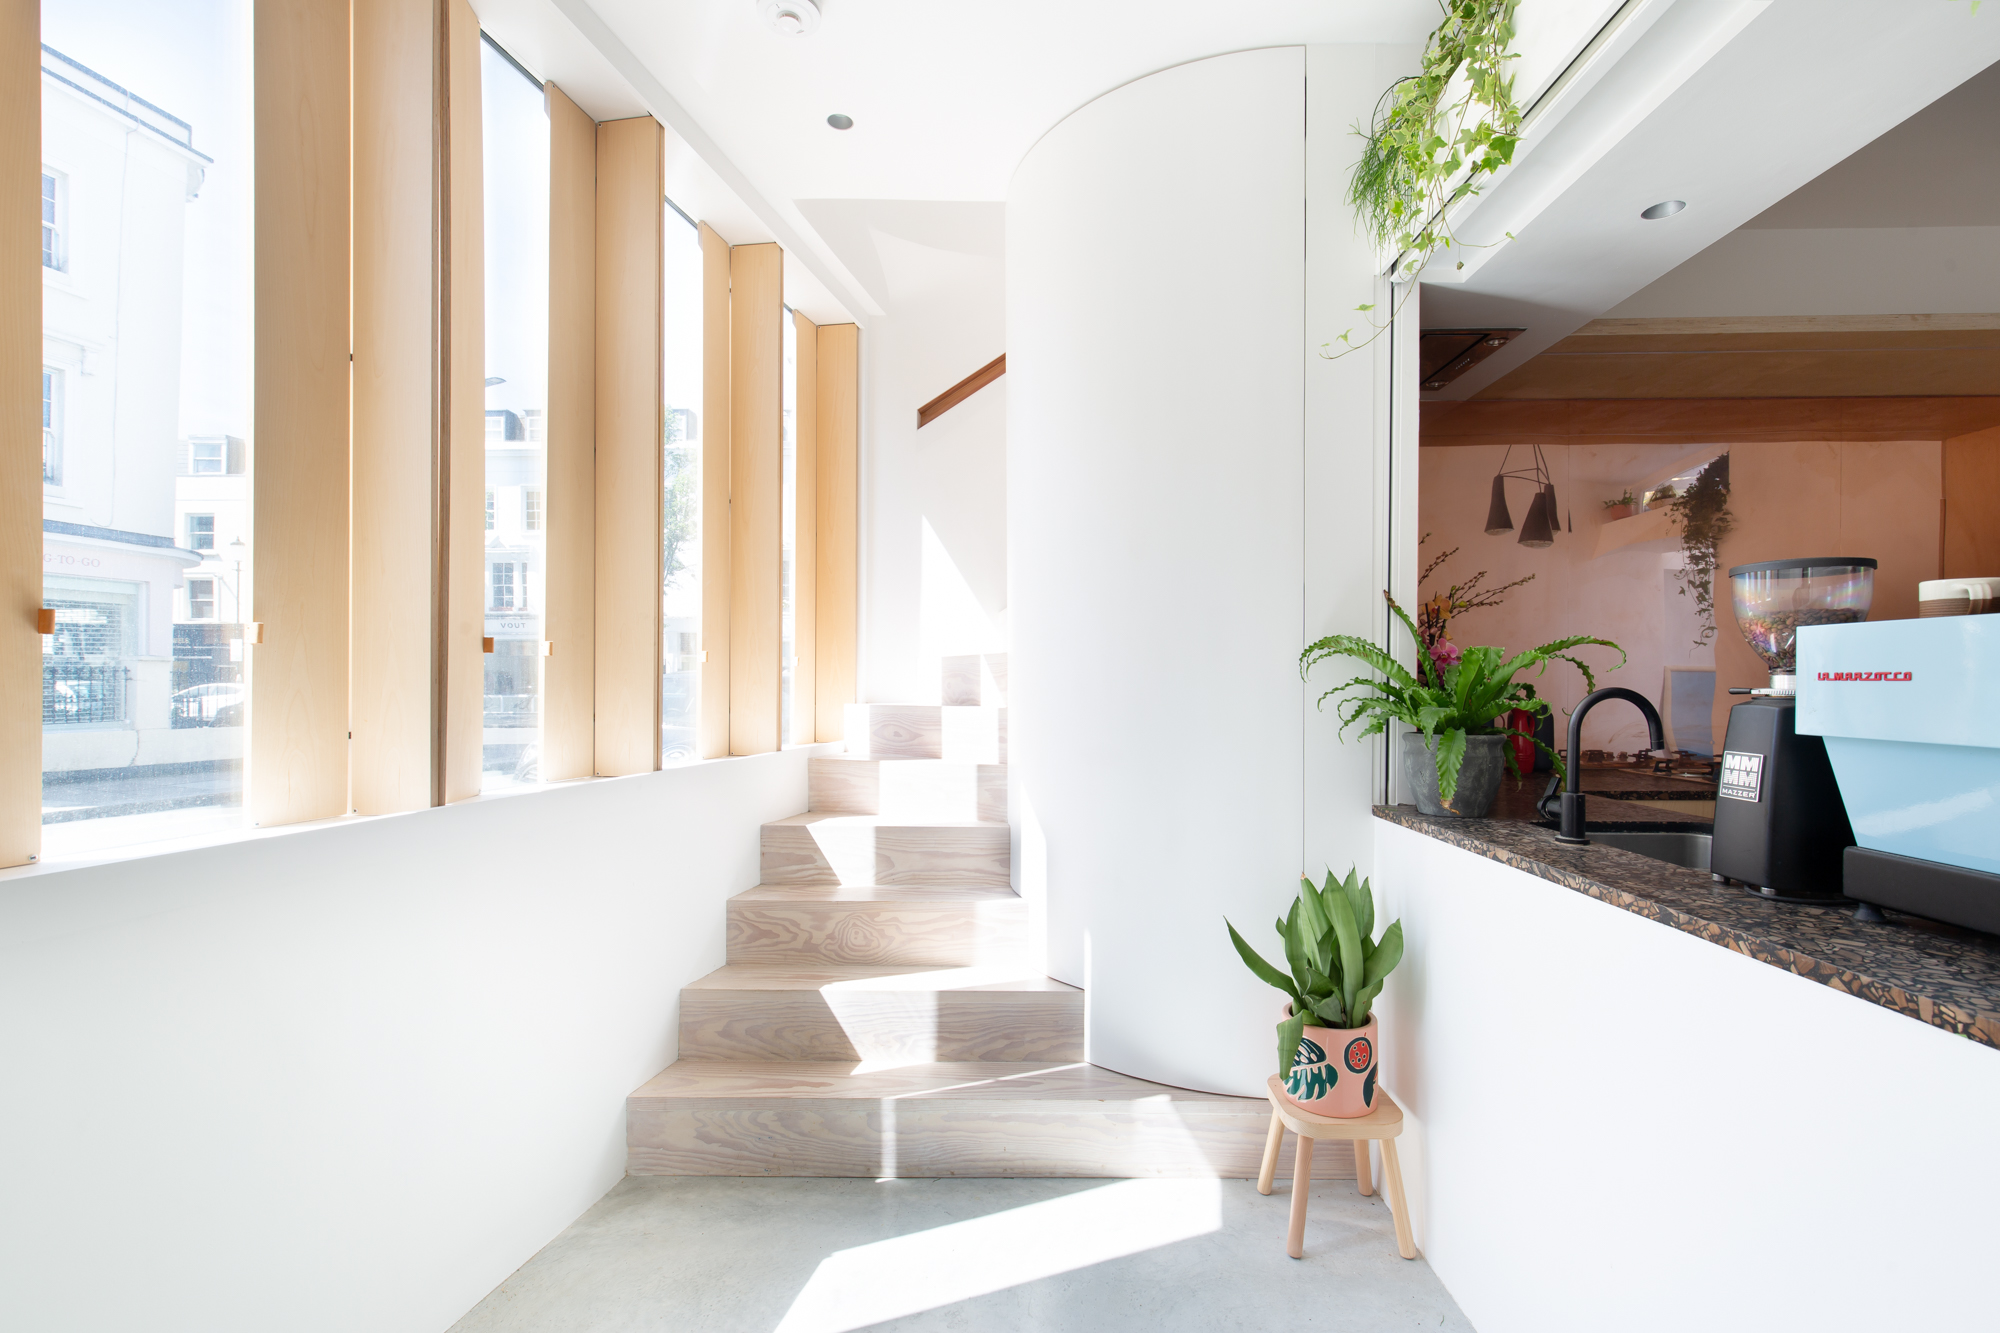 For Sale: Artesian Road, Notting Hill W11 contemporary staircase and windows